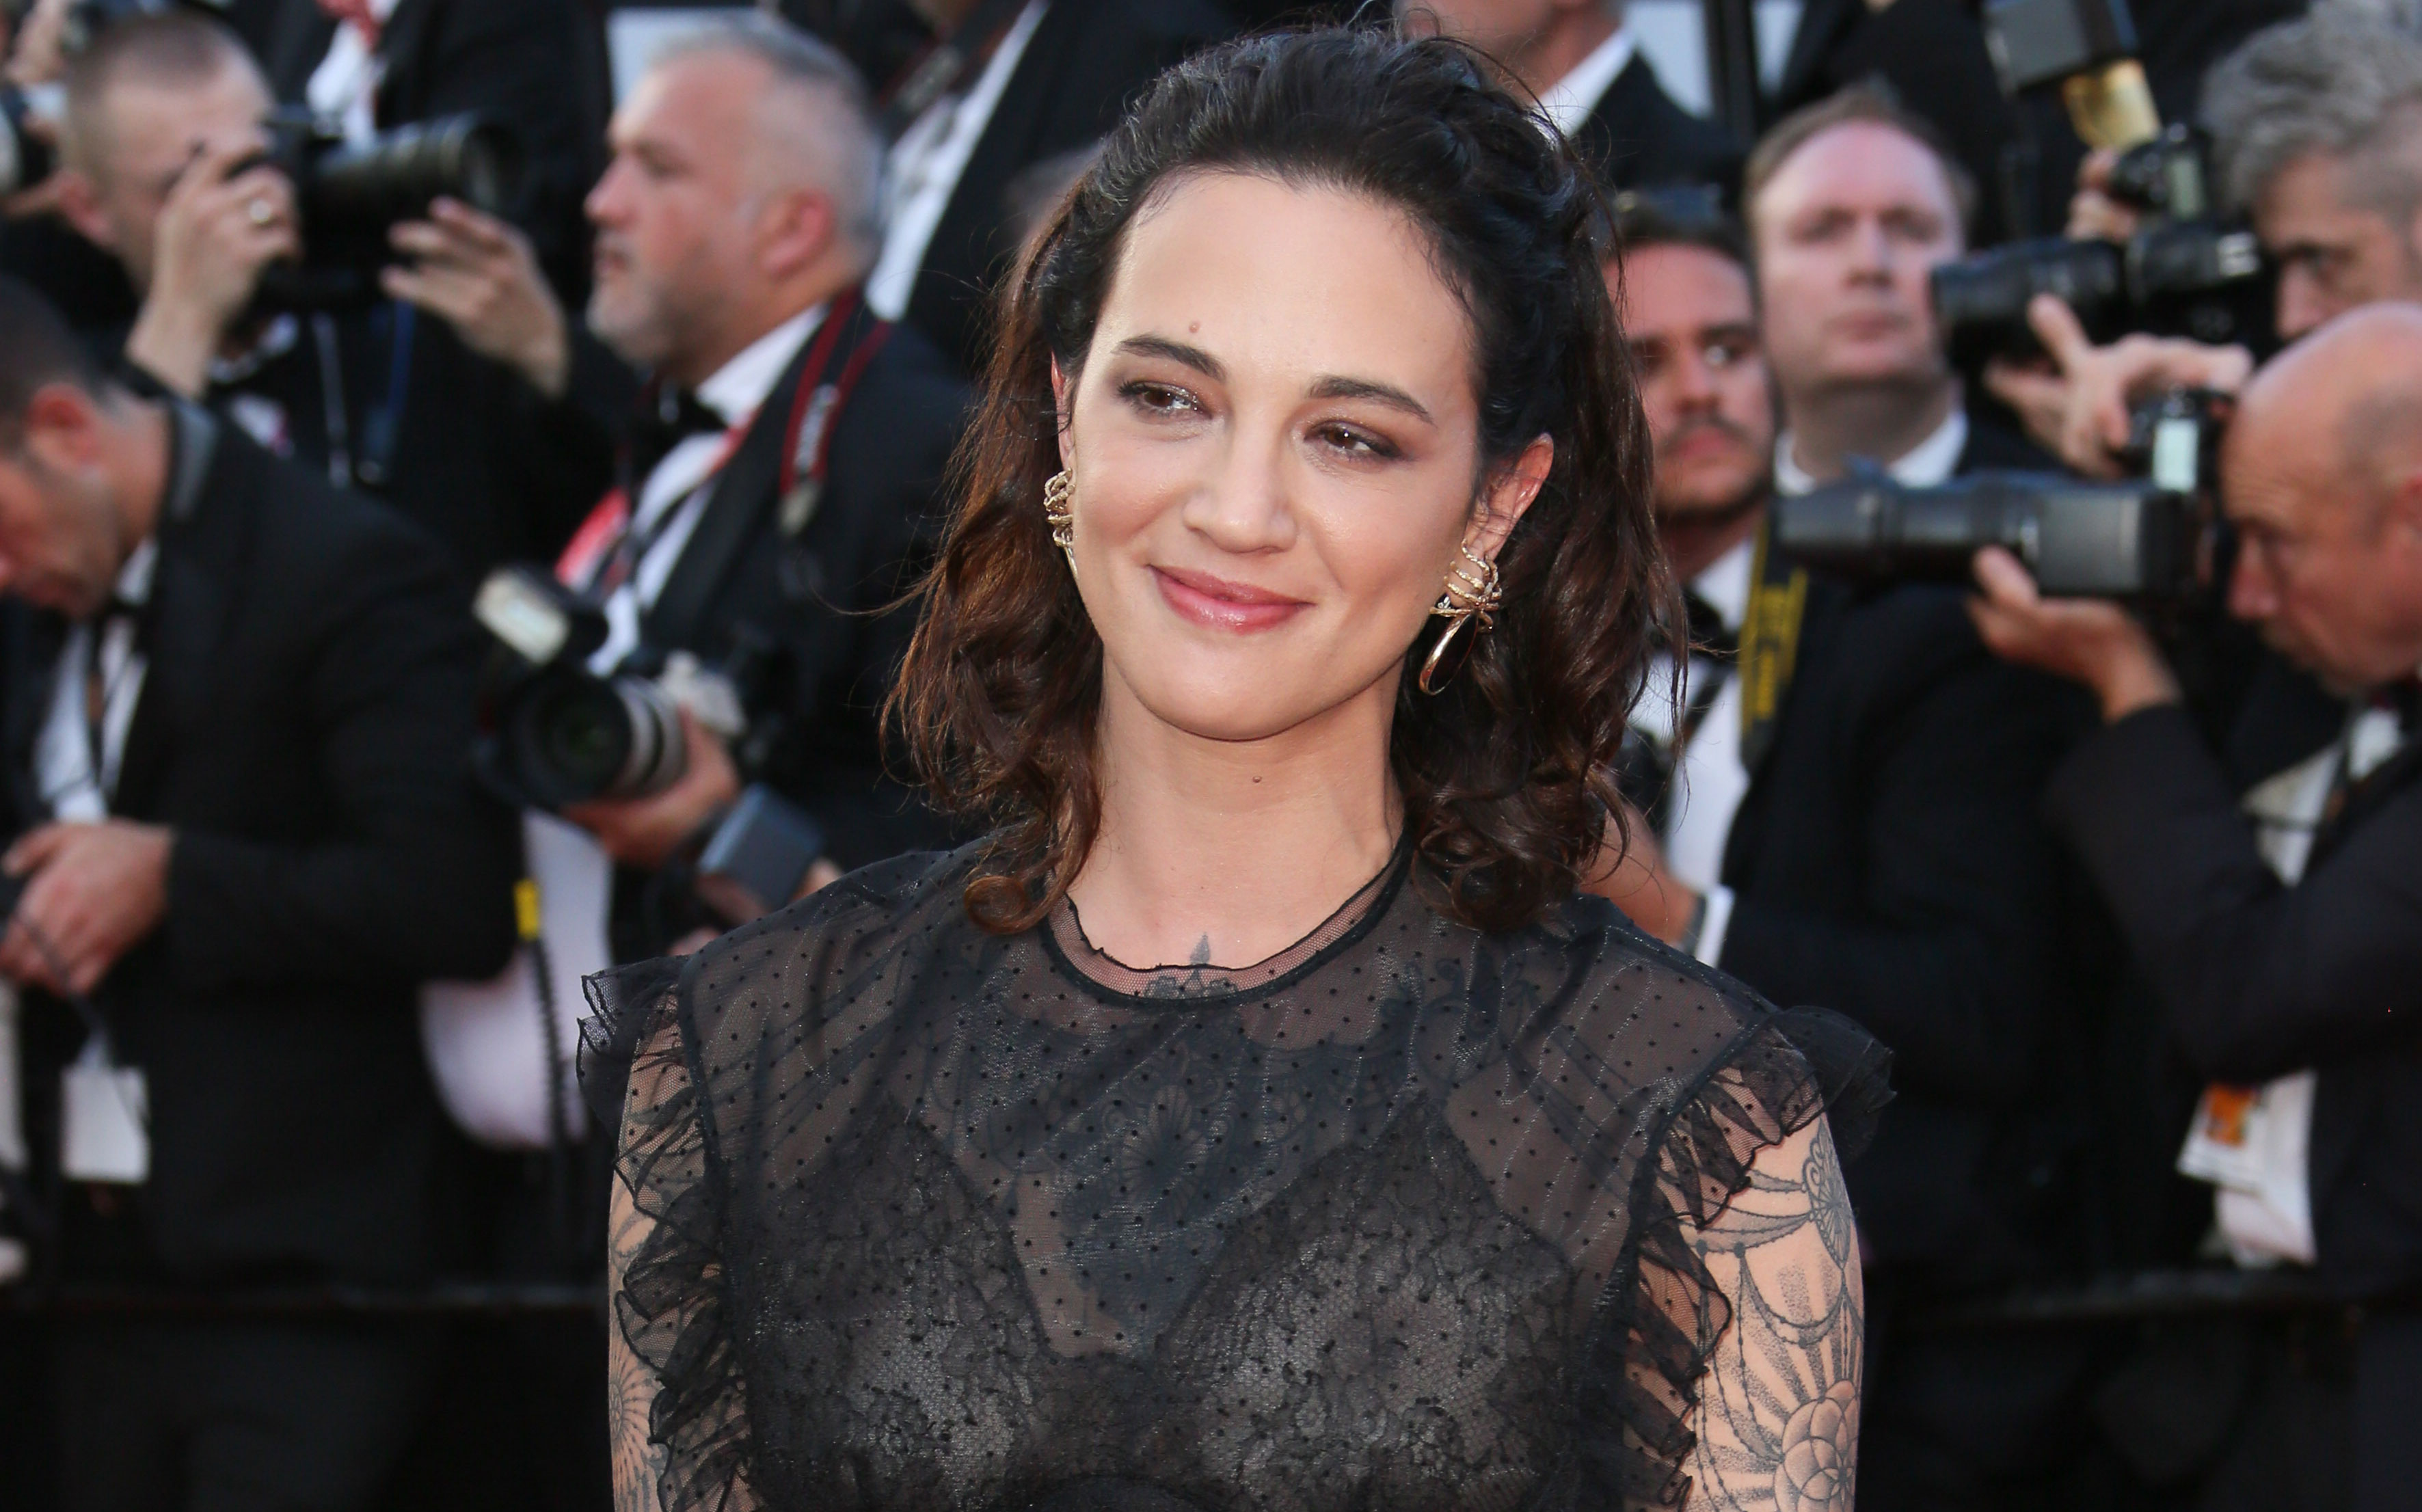 Asia Argento Fired From ‘X Factor’ Gig After Sexual Misconduct Allegation